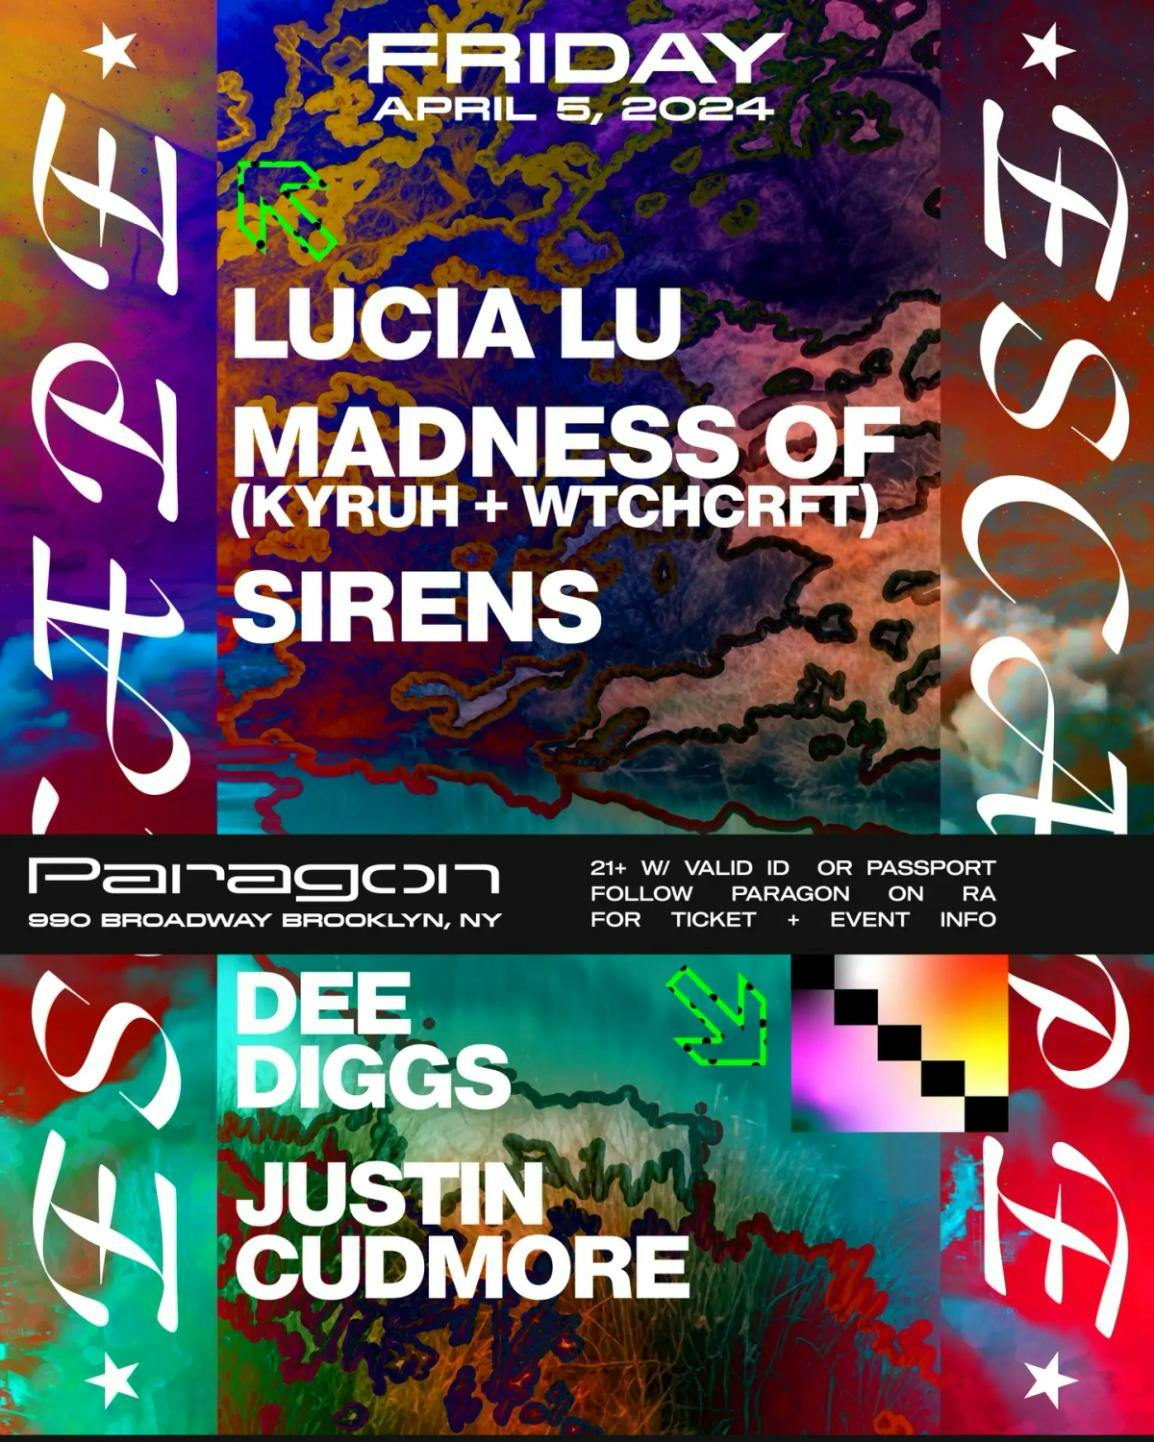 Escape: Lucia Lu, Madness Of, Sirens + Dee Diggs, Justin Cudmore